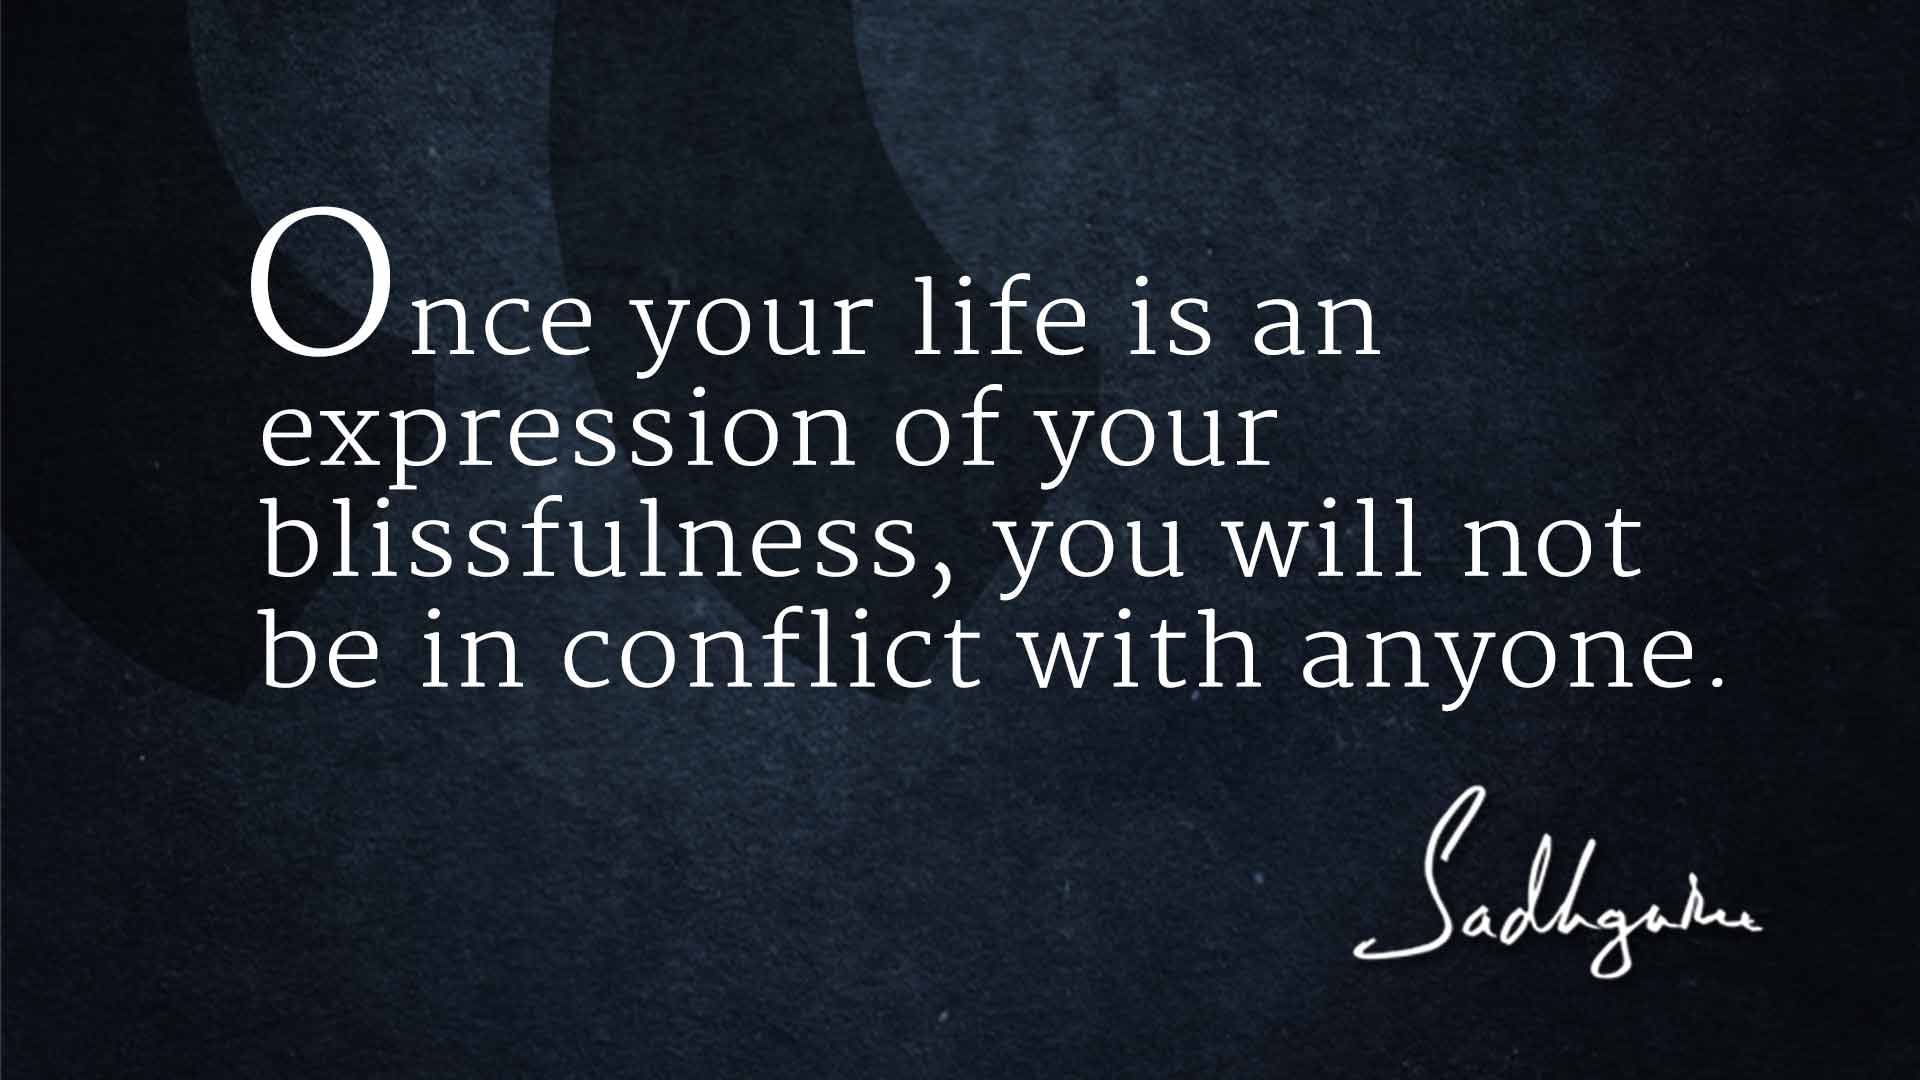 Sadhguru's quote on the importance for one's life to be the expression of blissfulness